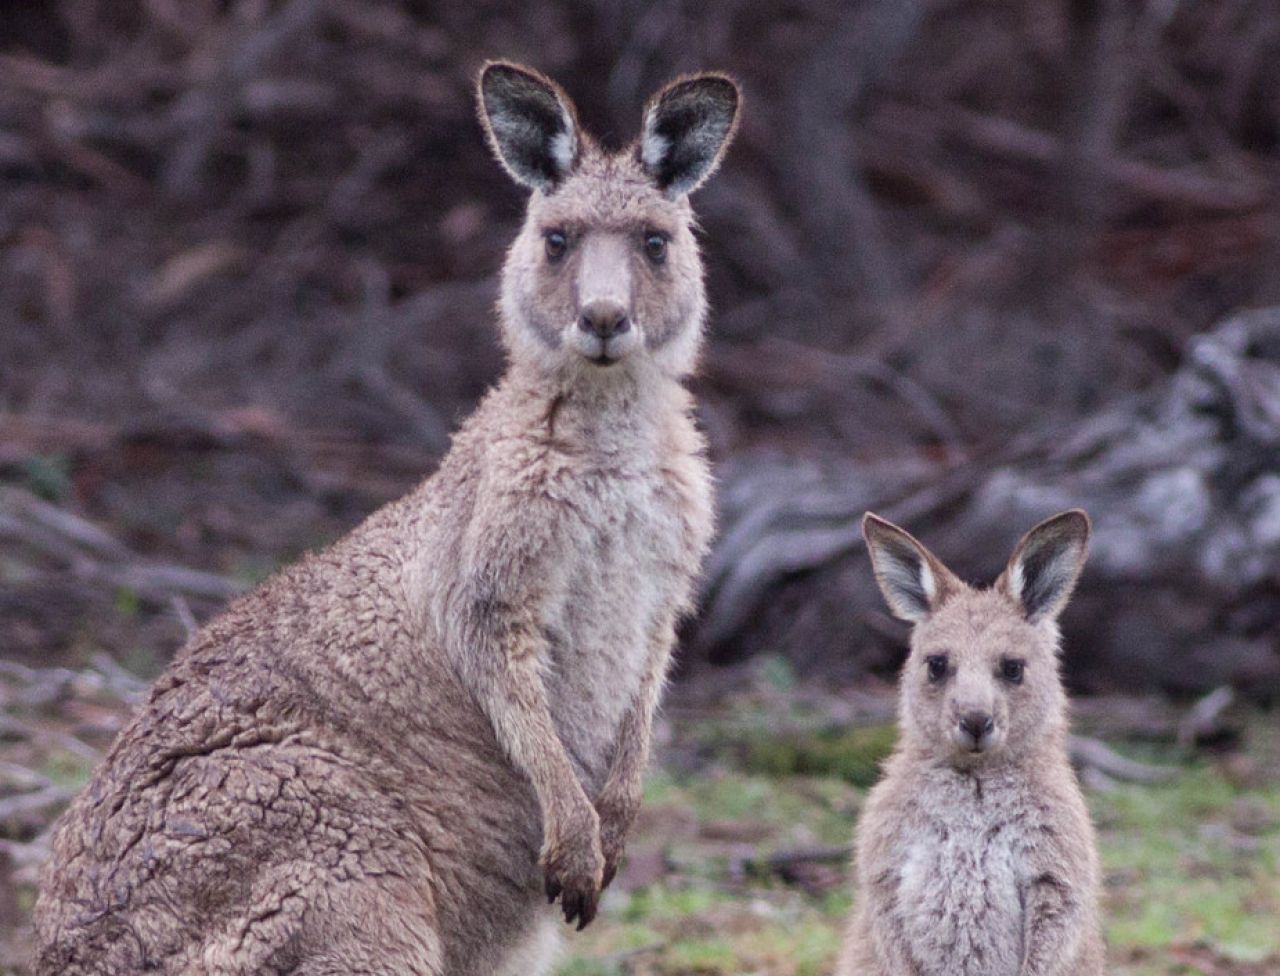 How staying close to mum pays off for kangaroos thumbnail image